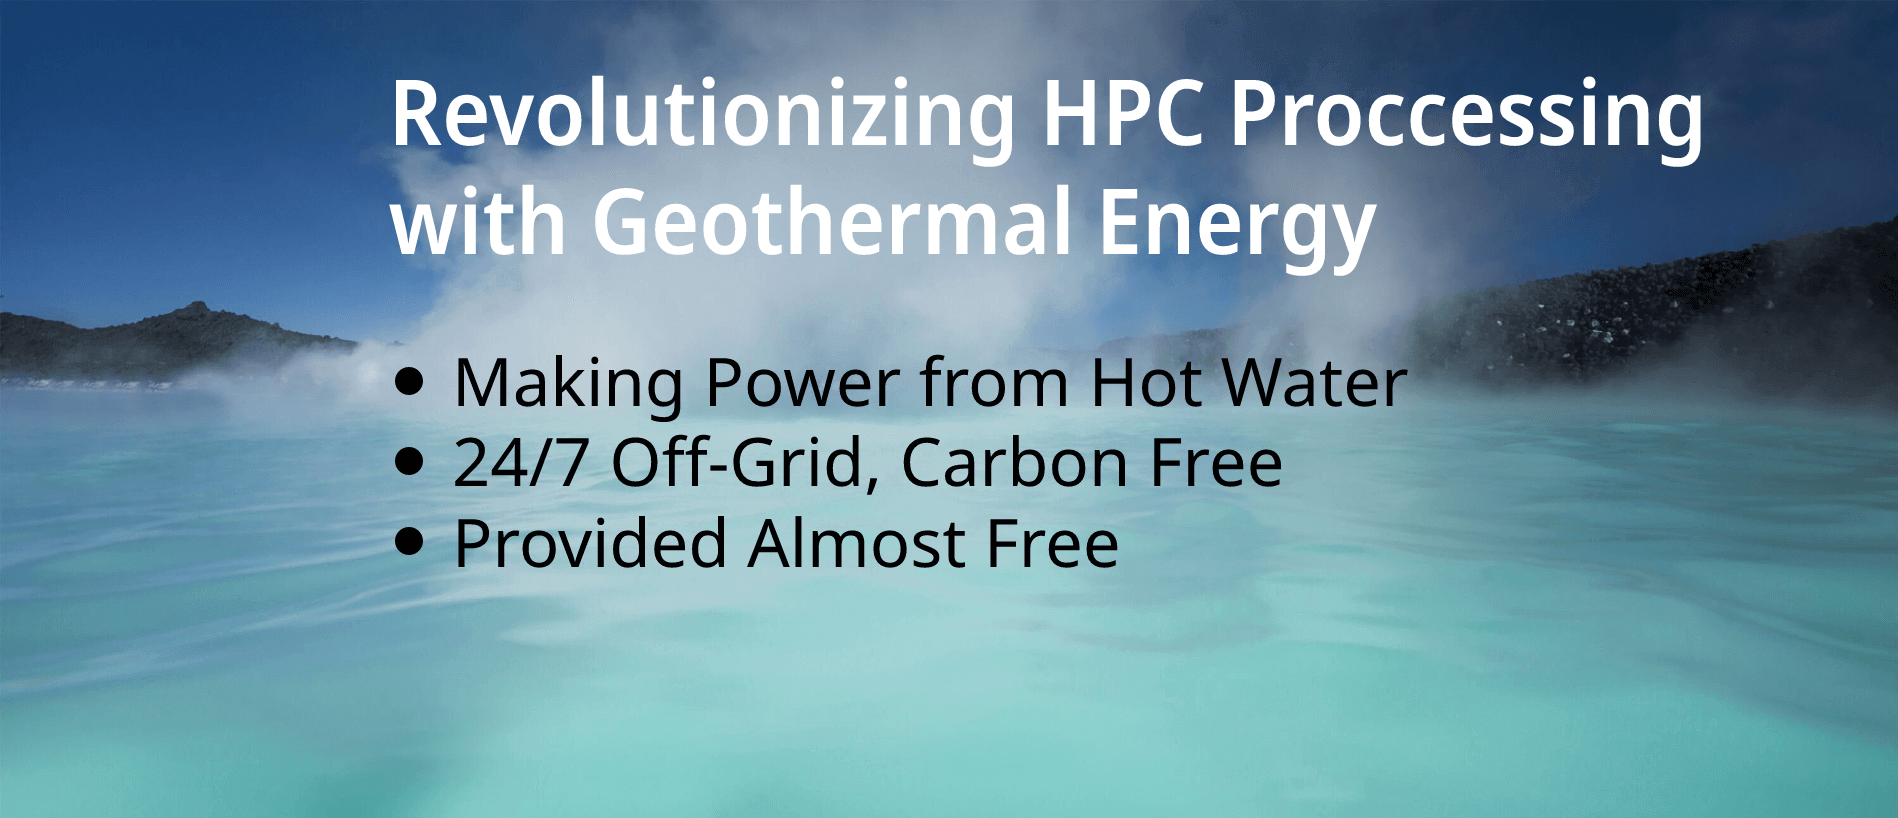 Revolutionizing HPC Proccessing with Geothermal Energy